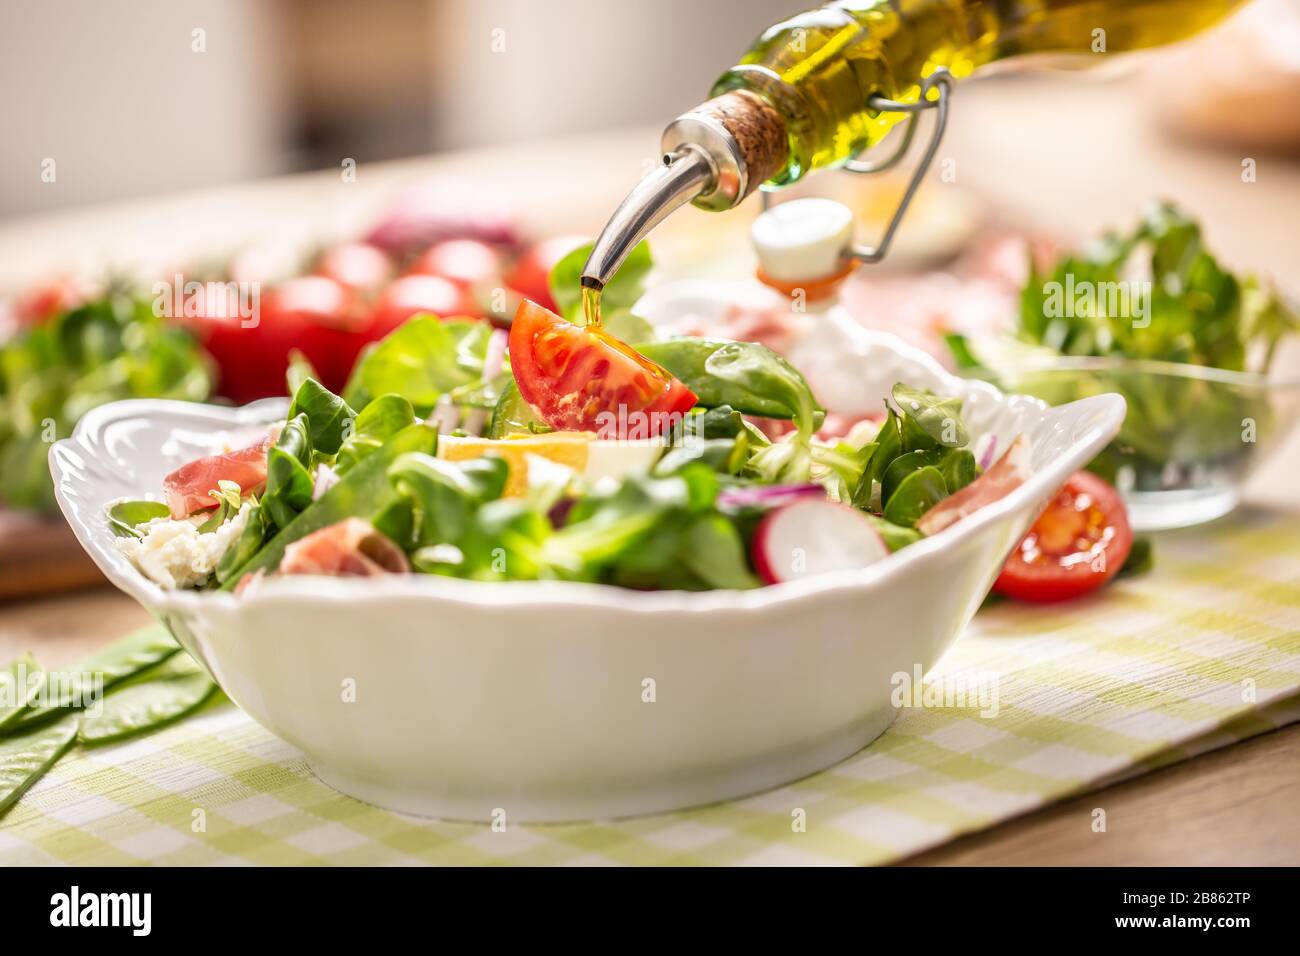 Bottle with olive oil pouring into salad Stock Photo